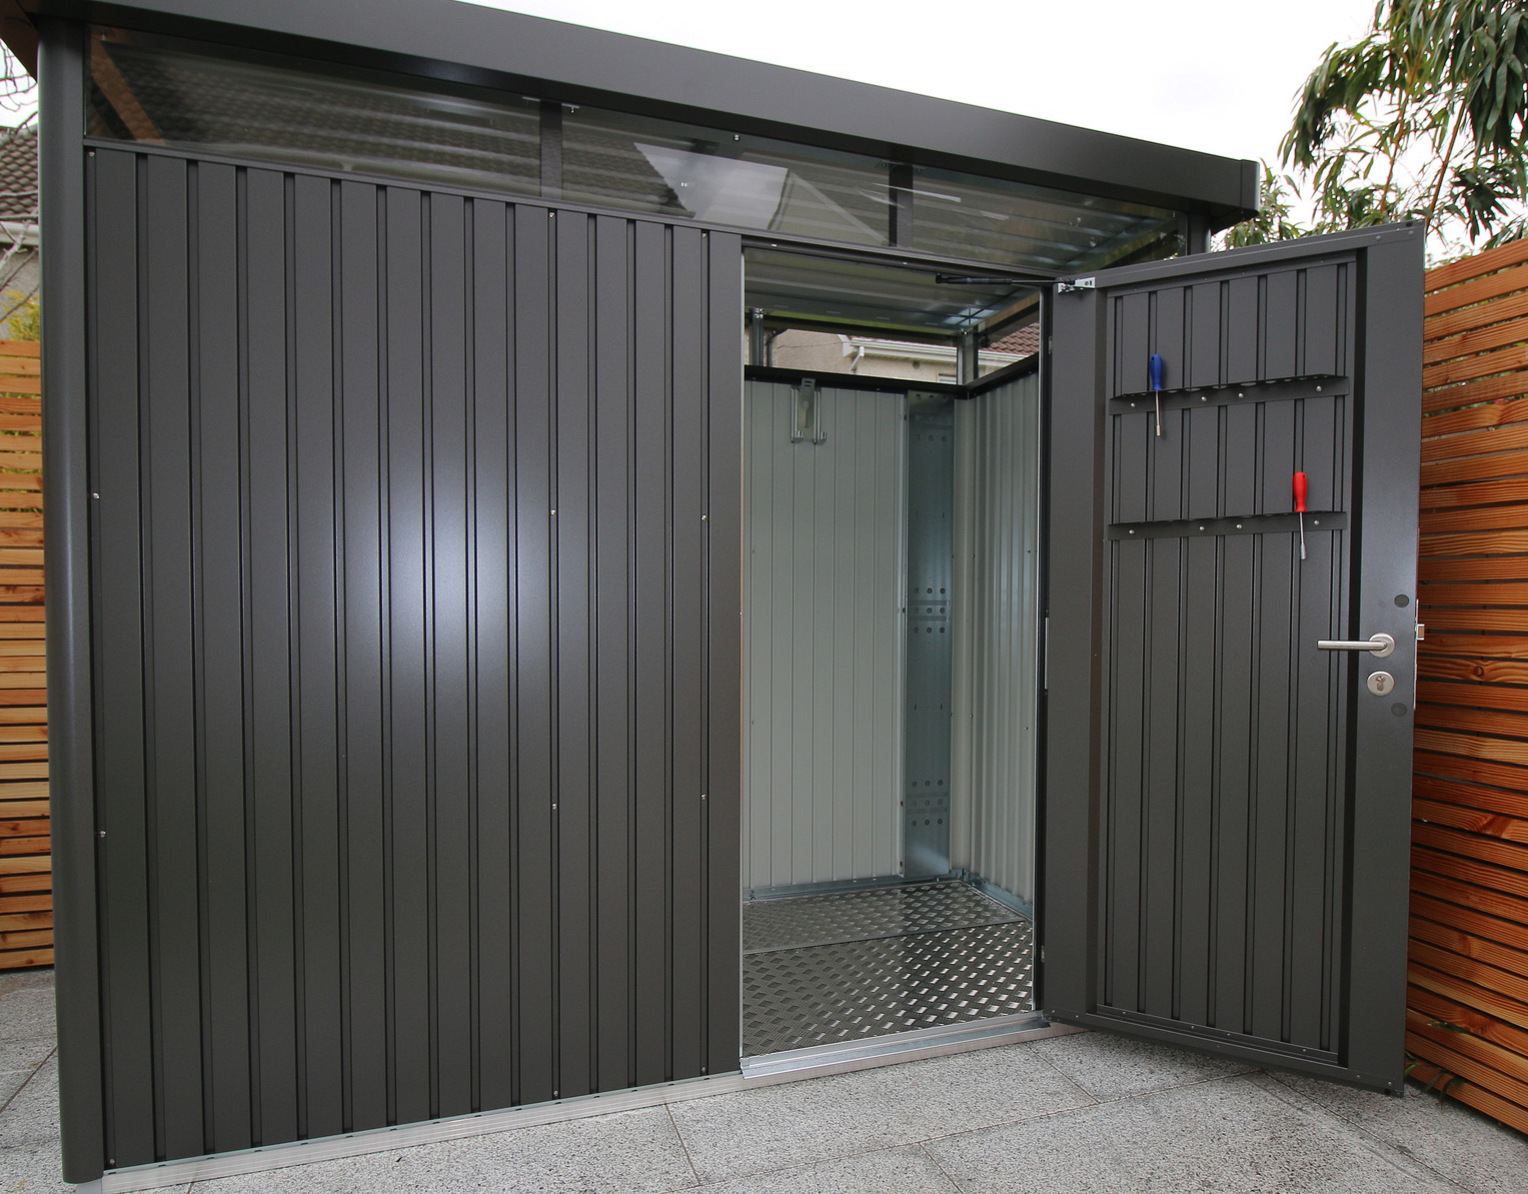 The Biohort HighLine H3 in metallic dark grey with optional accessories including aluminium floor frame & panels, electrical mounting panel |  Supplied + Fitted in Dublin 16 by Owen Chubb